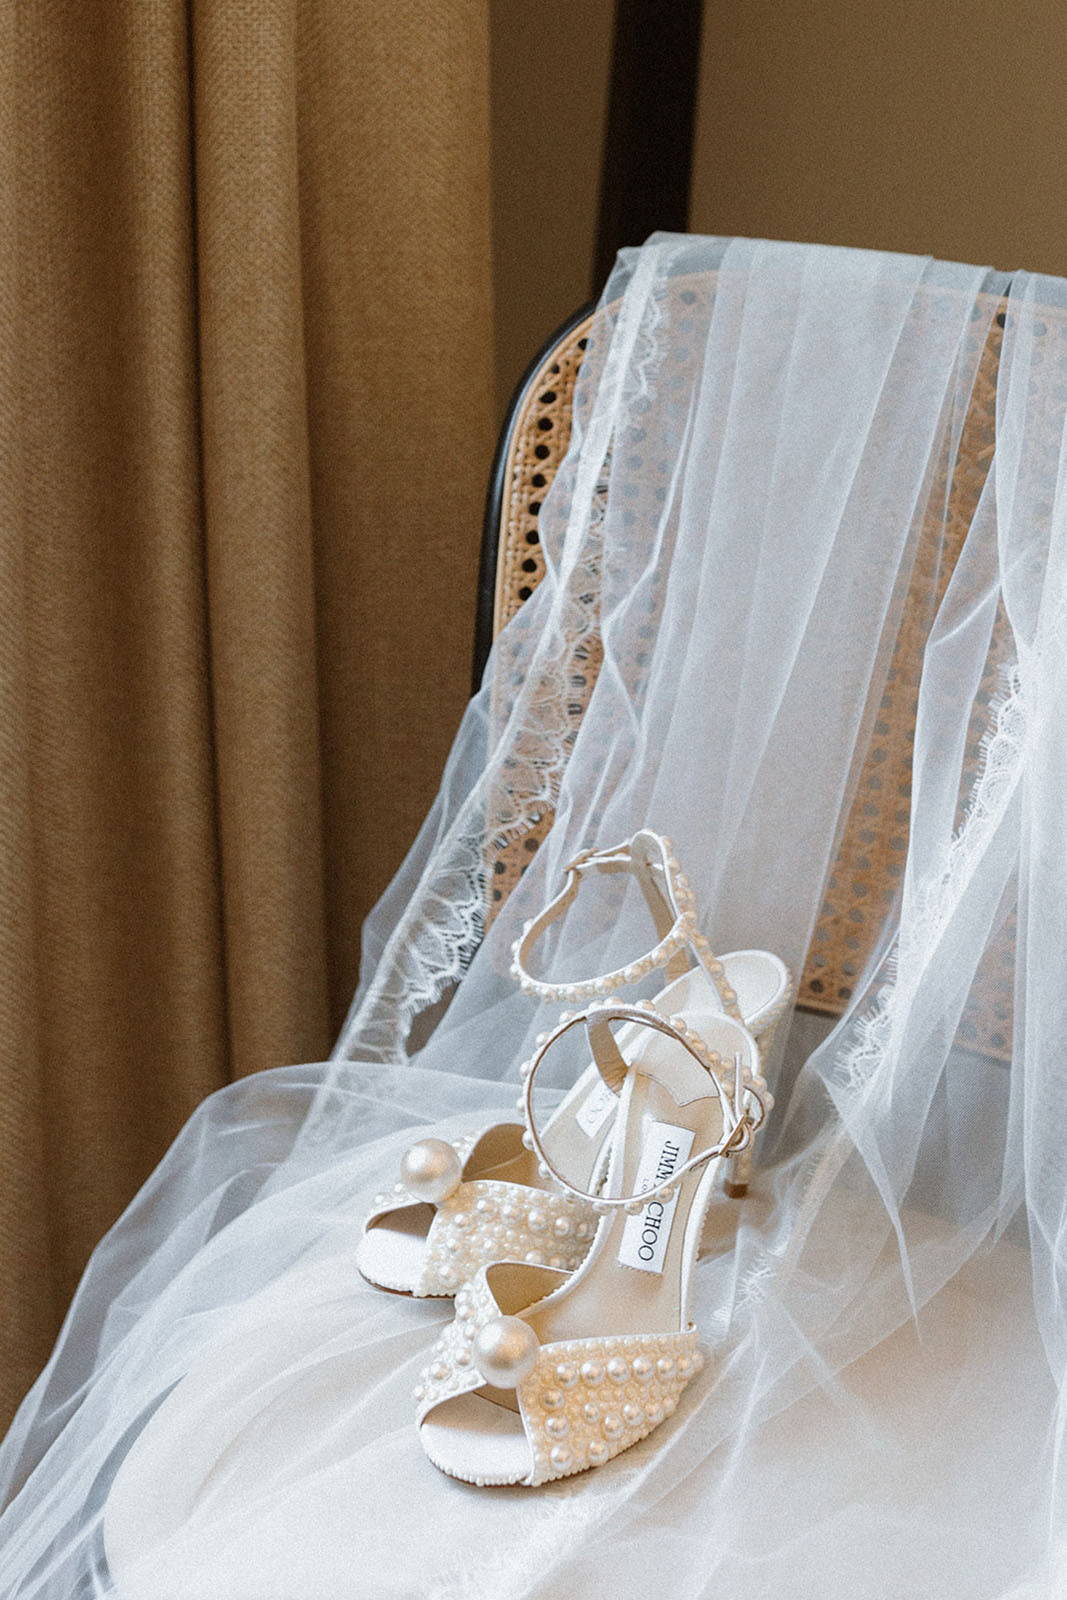 wedding dress and wedding shoes on a chair